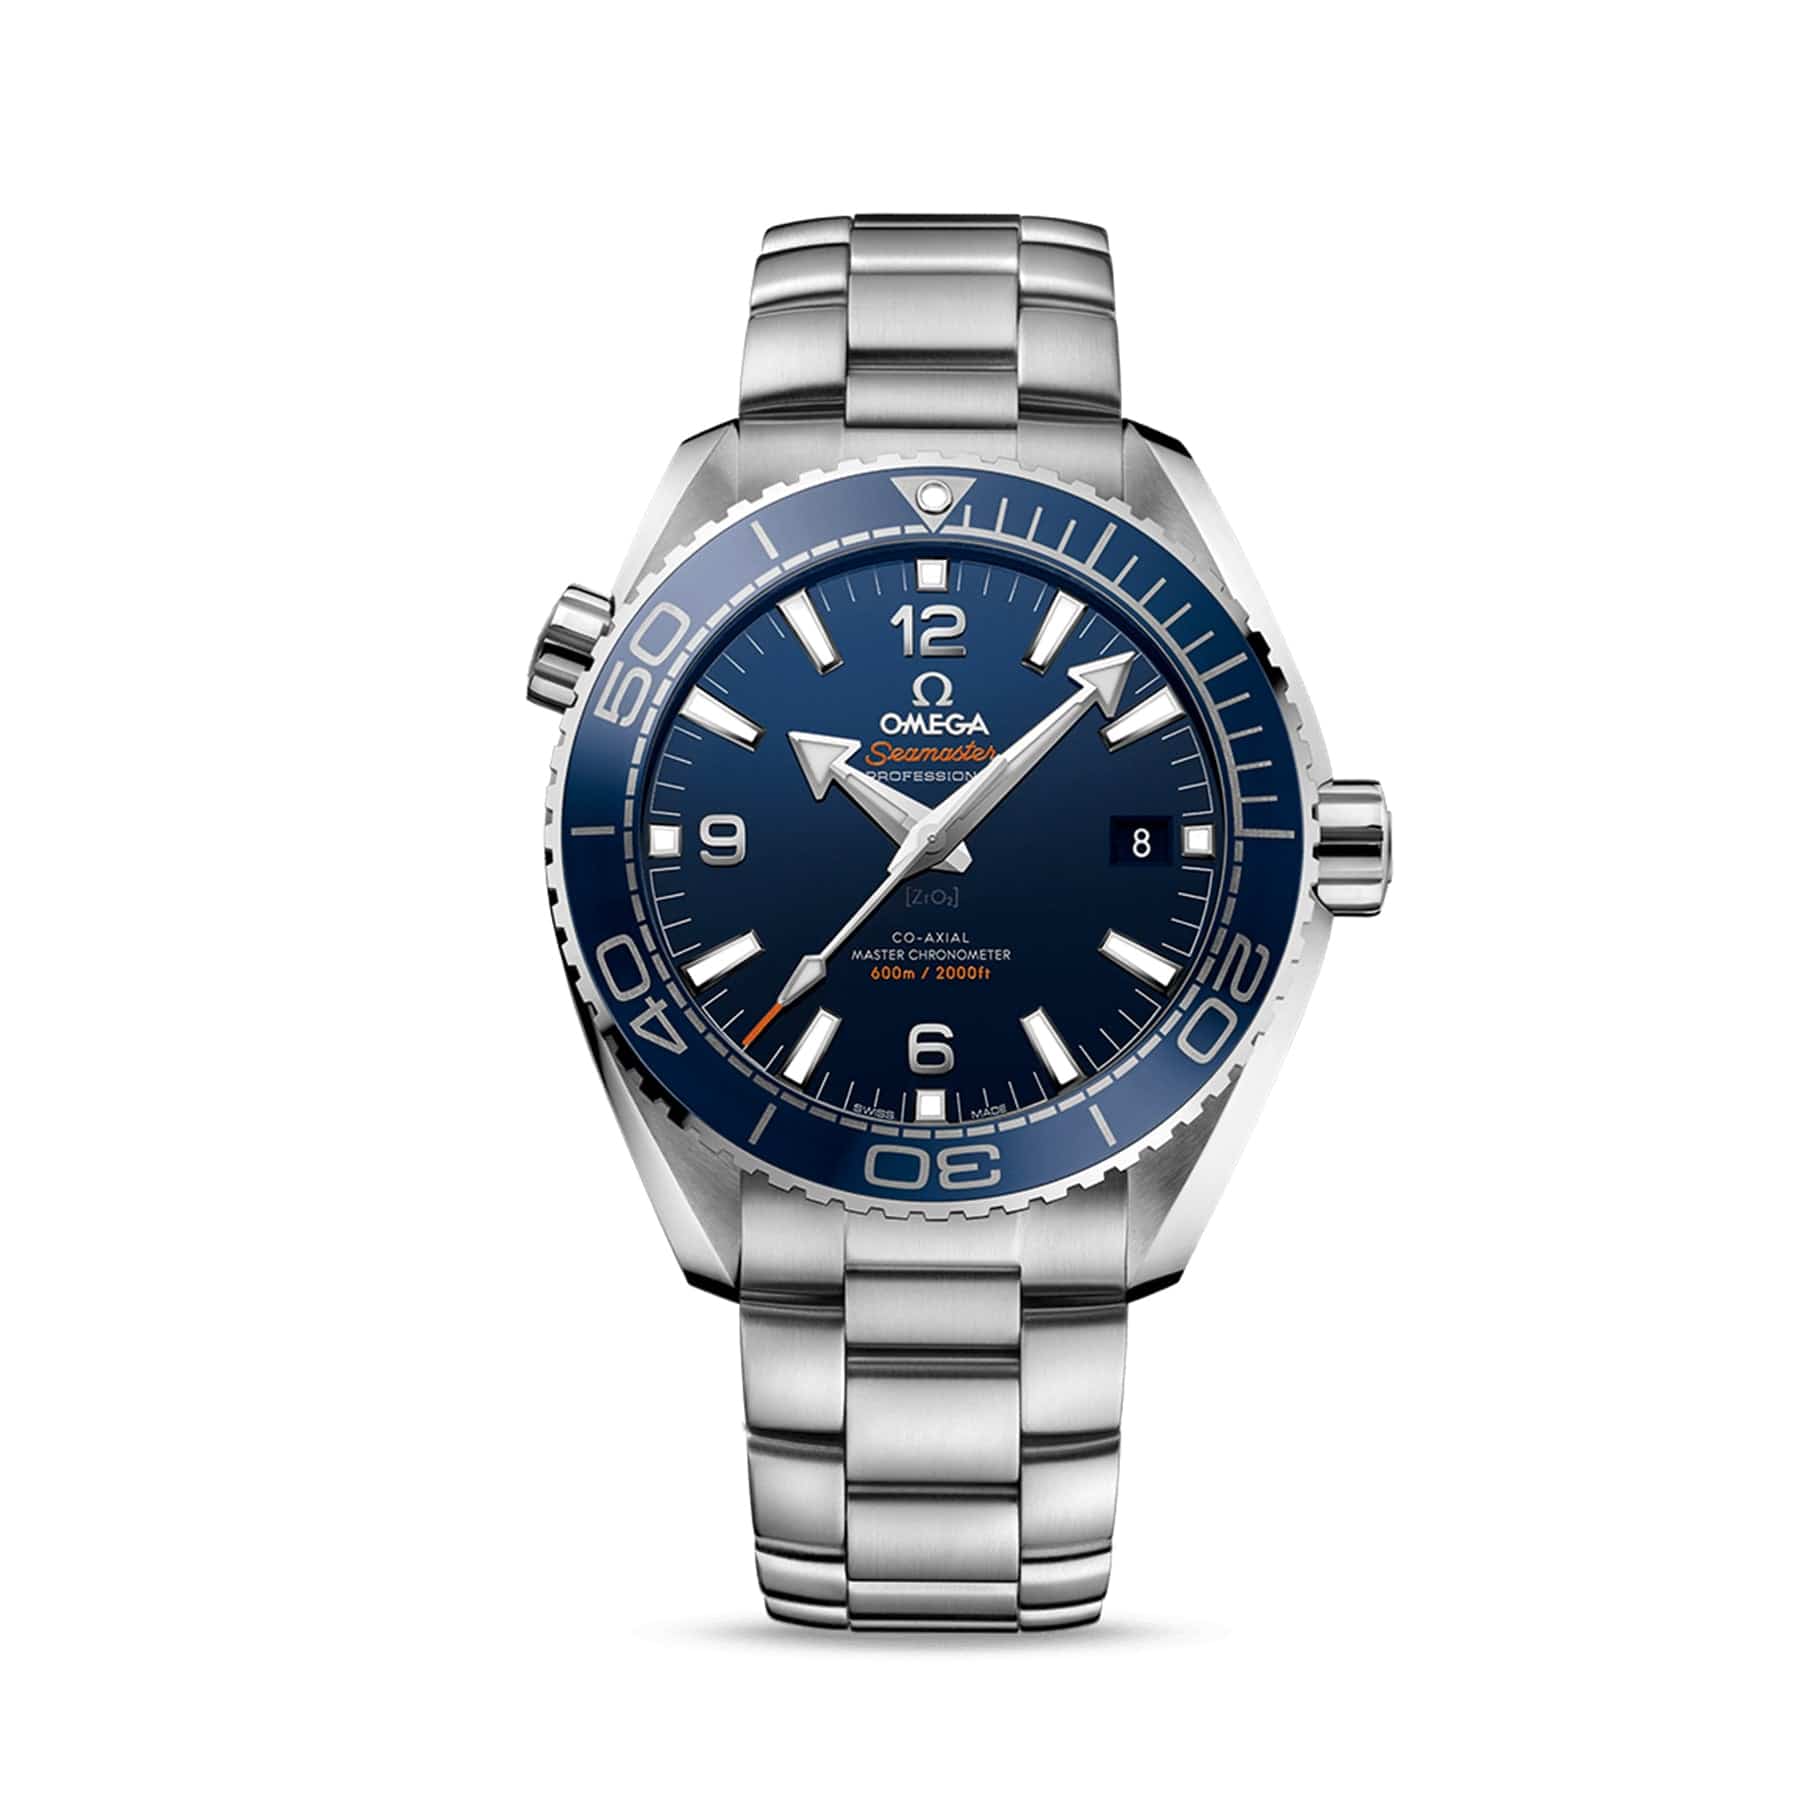 OMEGA Seamaster Planet Ocean 600M Co-Axial Master Chronometer 43.5mm